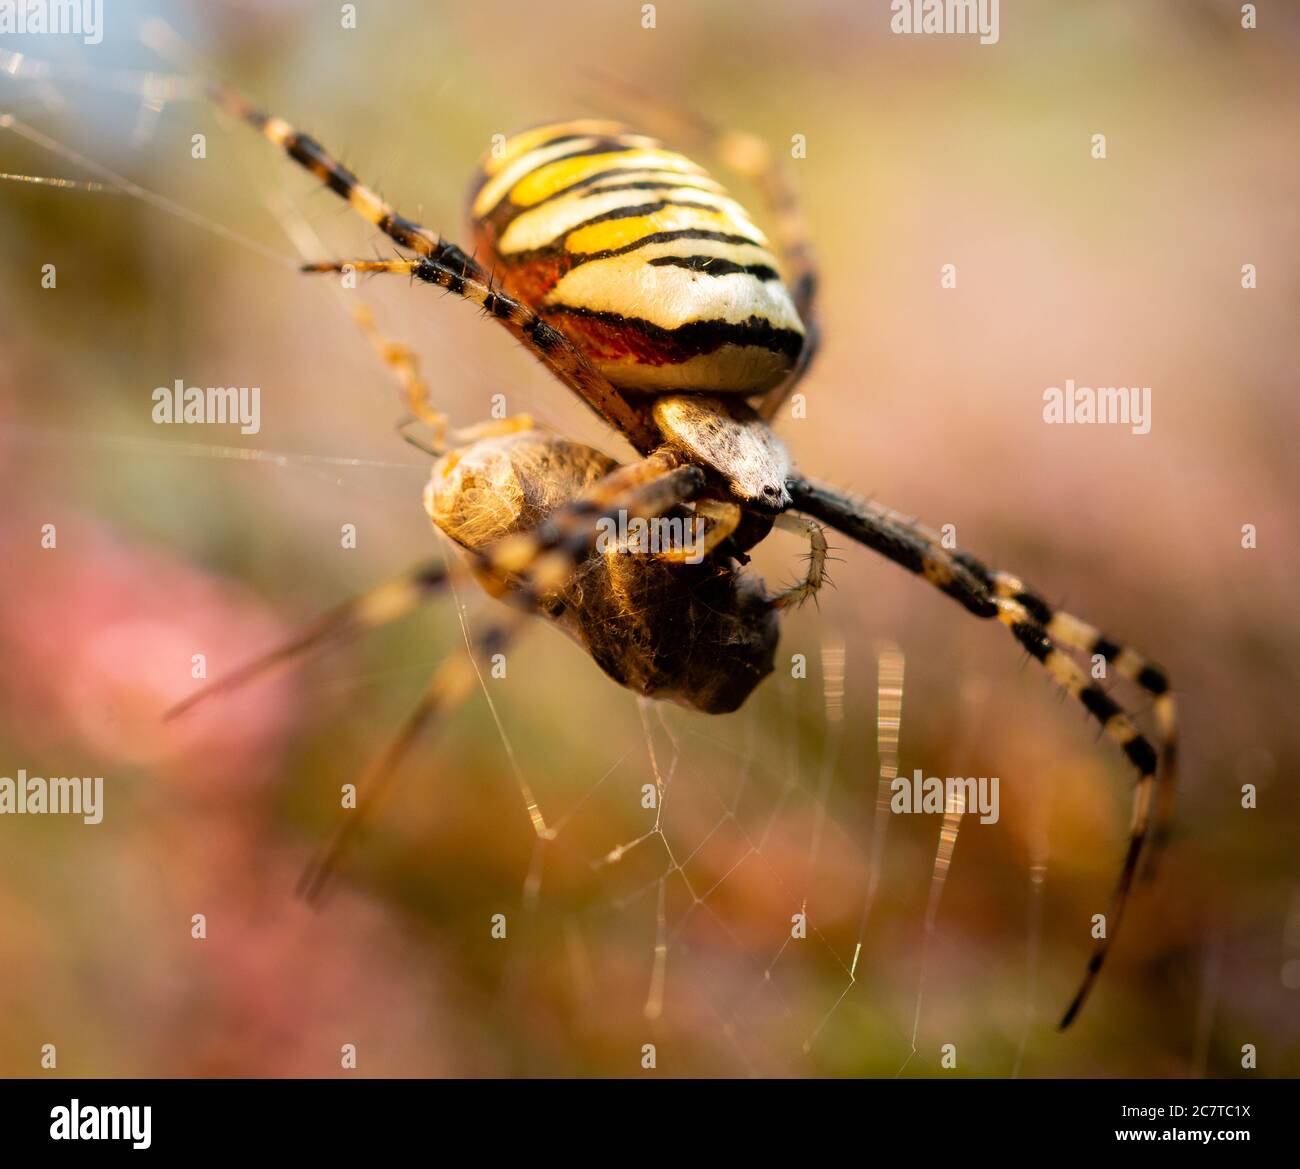 Wasp spider (Argiope bruennichi) wrapping up the freshly caught prey in her web on a Suffolk heath Stock Photo